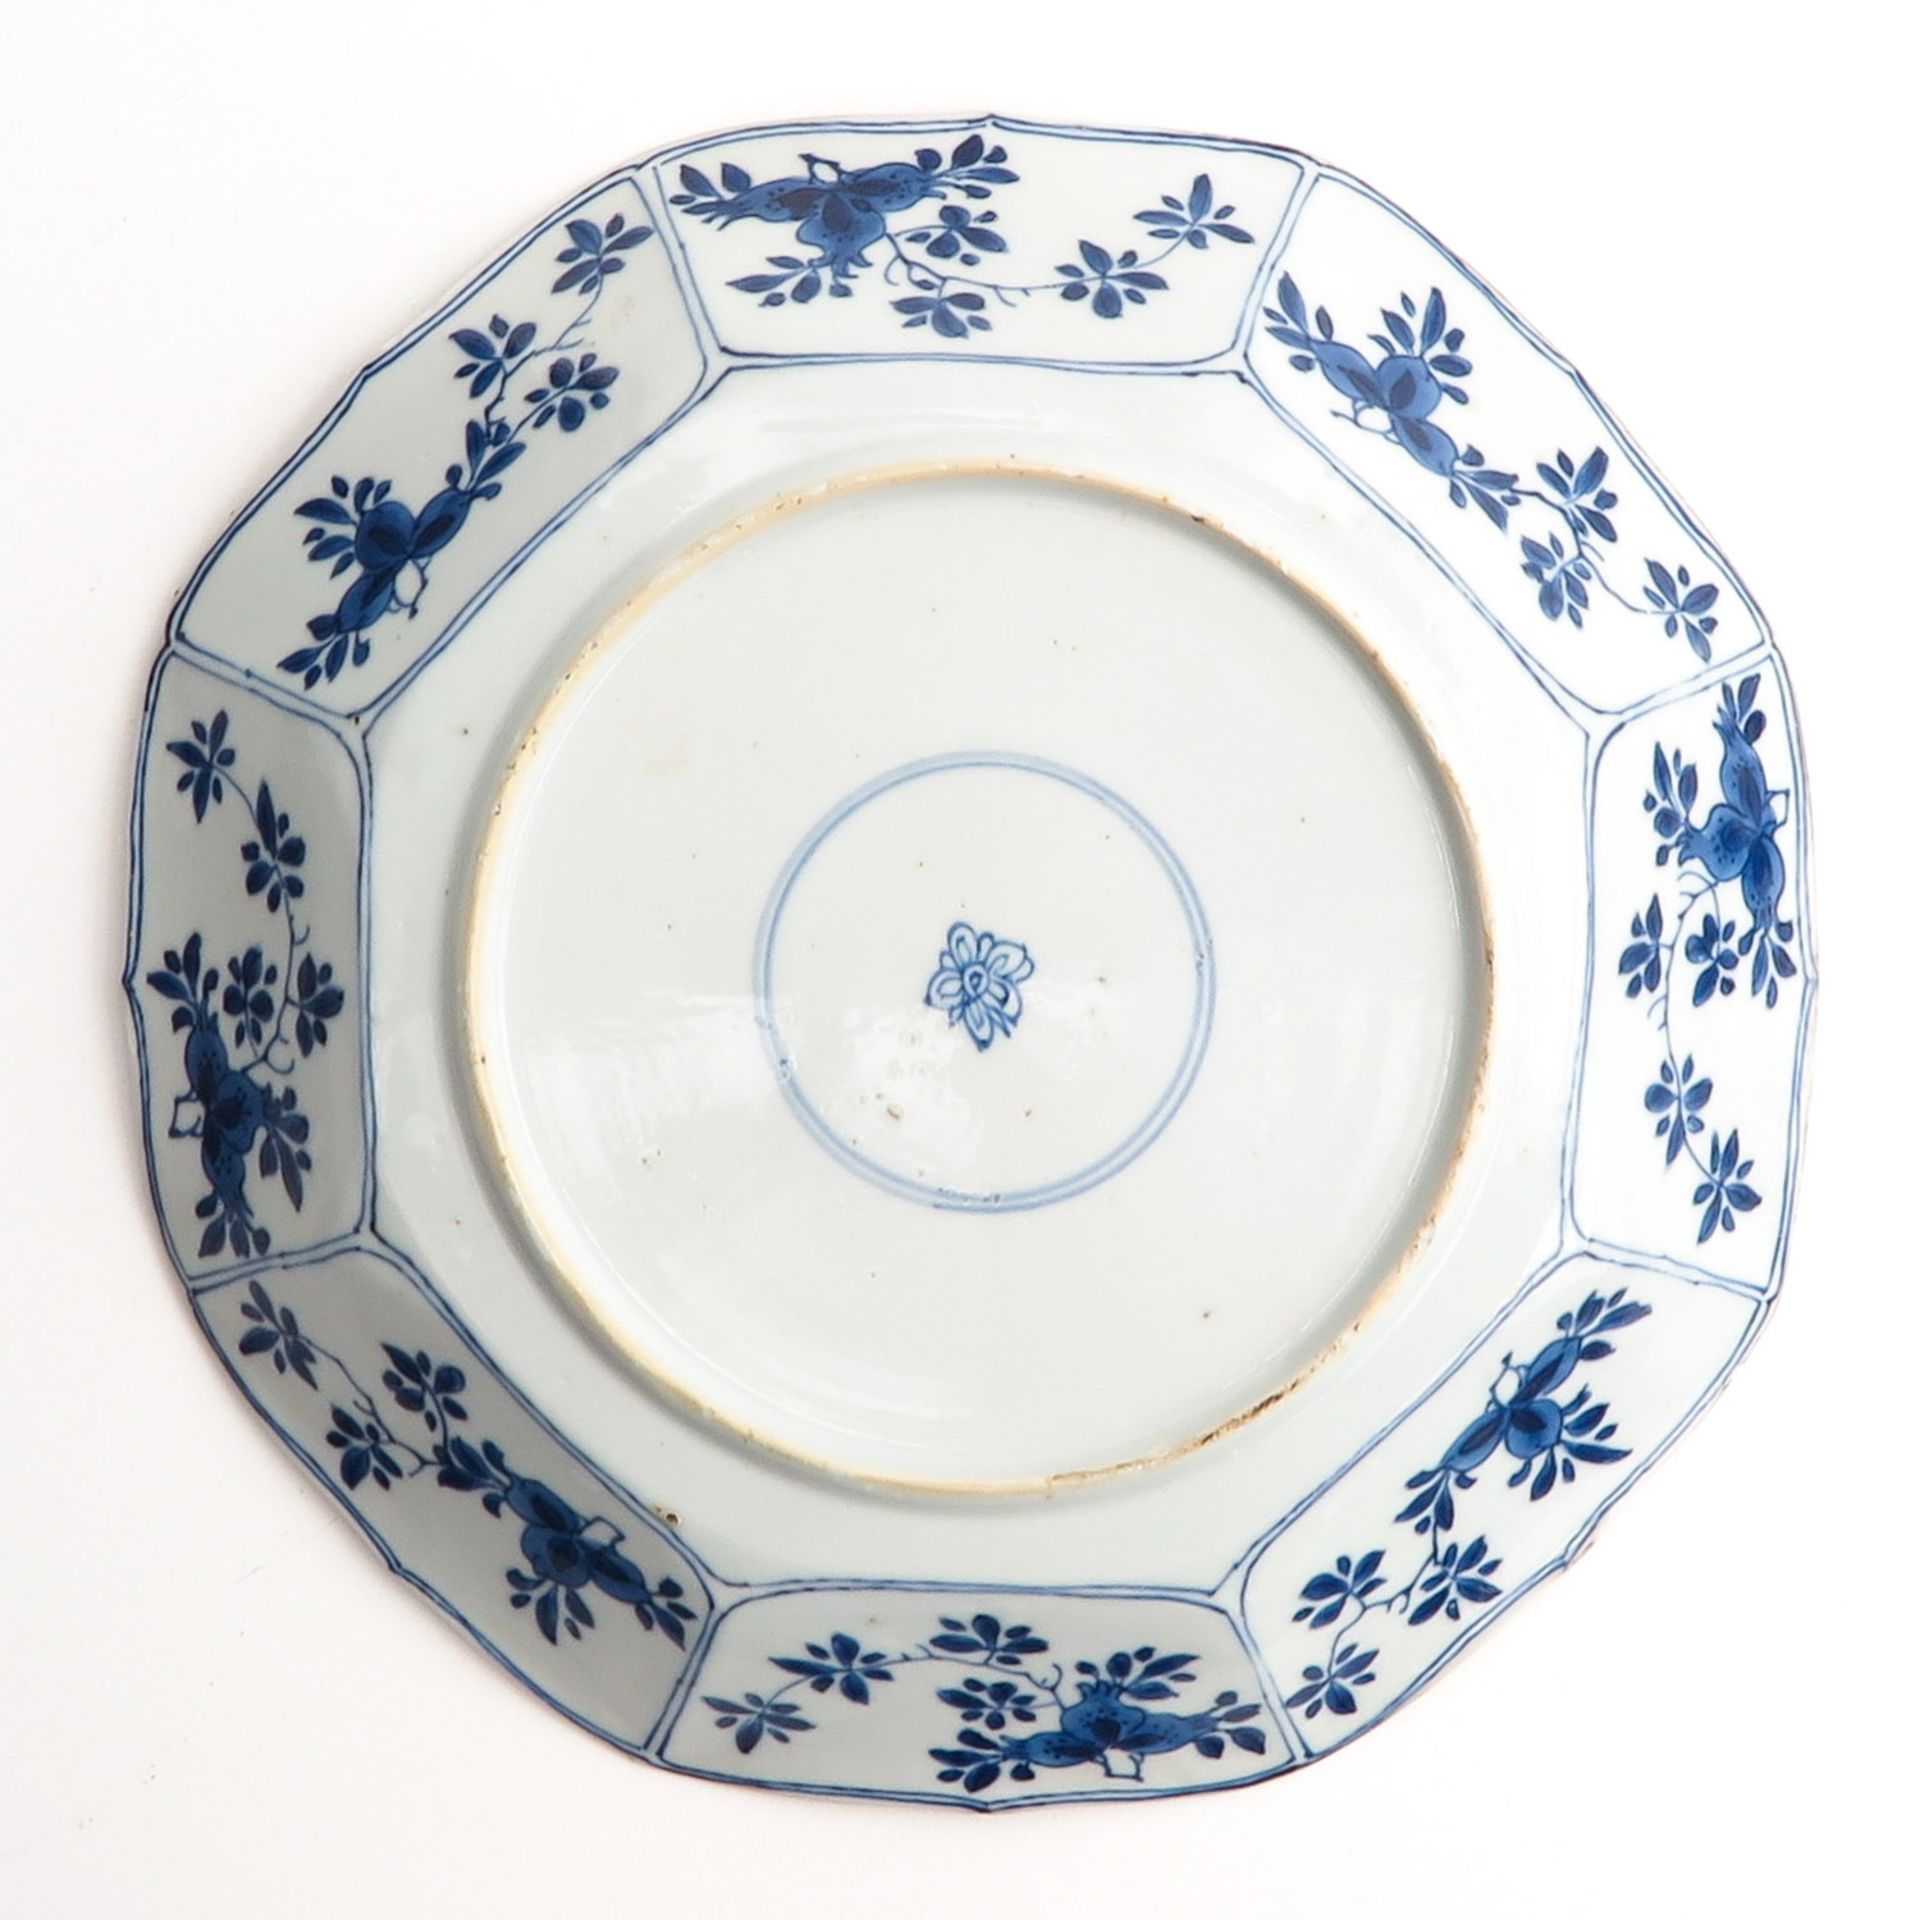 Two Blue and White Plates - Image 6 of 10